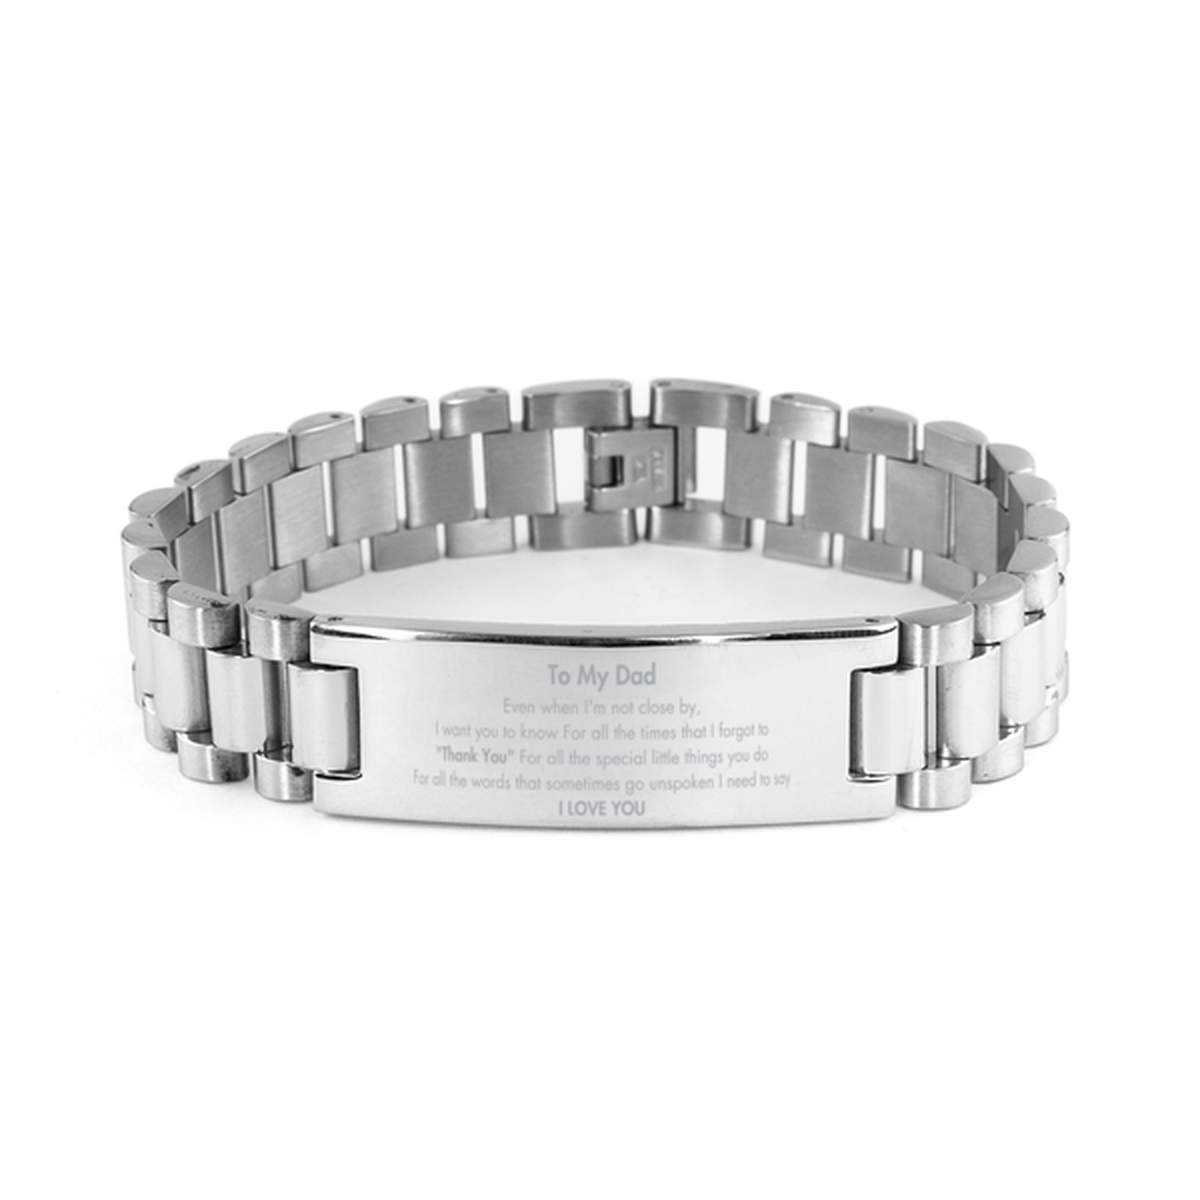 Thank You Gifts for Dad, Keepsake Ladder Stainless Steel Bracelet Gifts for Dad Birthday Mother's day Father's Day Dad For all the words That sometimes go unspoken I need to say I LOVE YOU